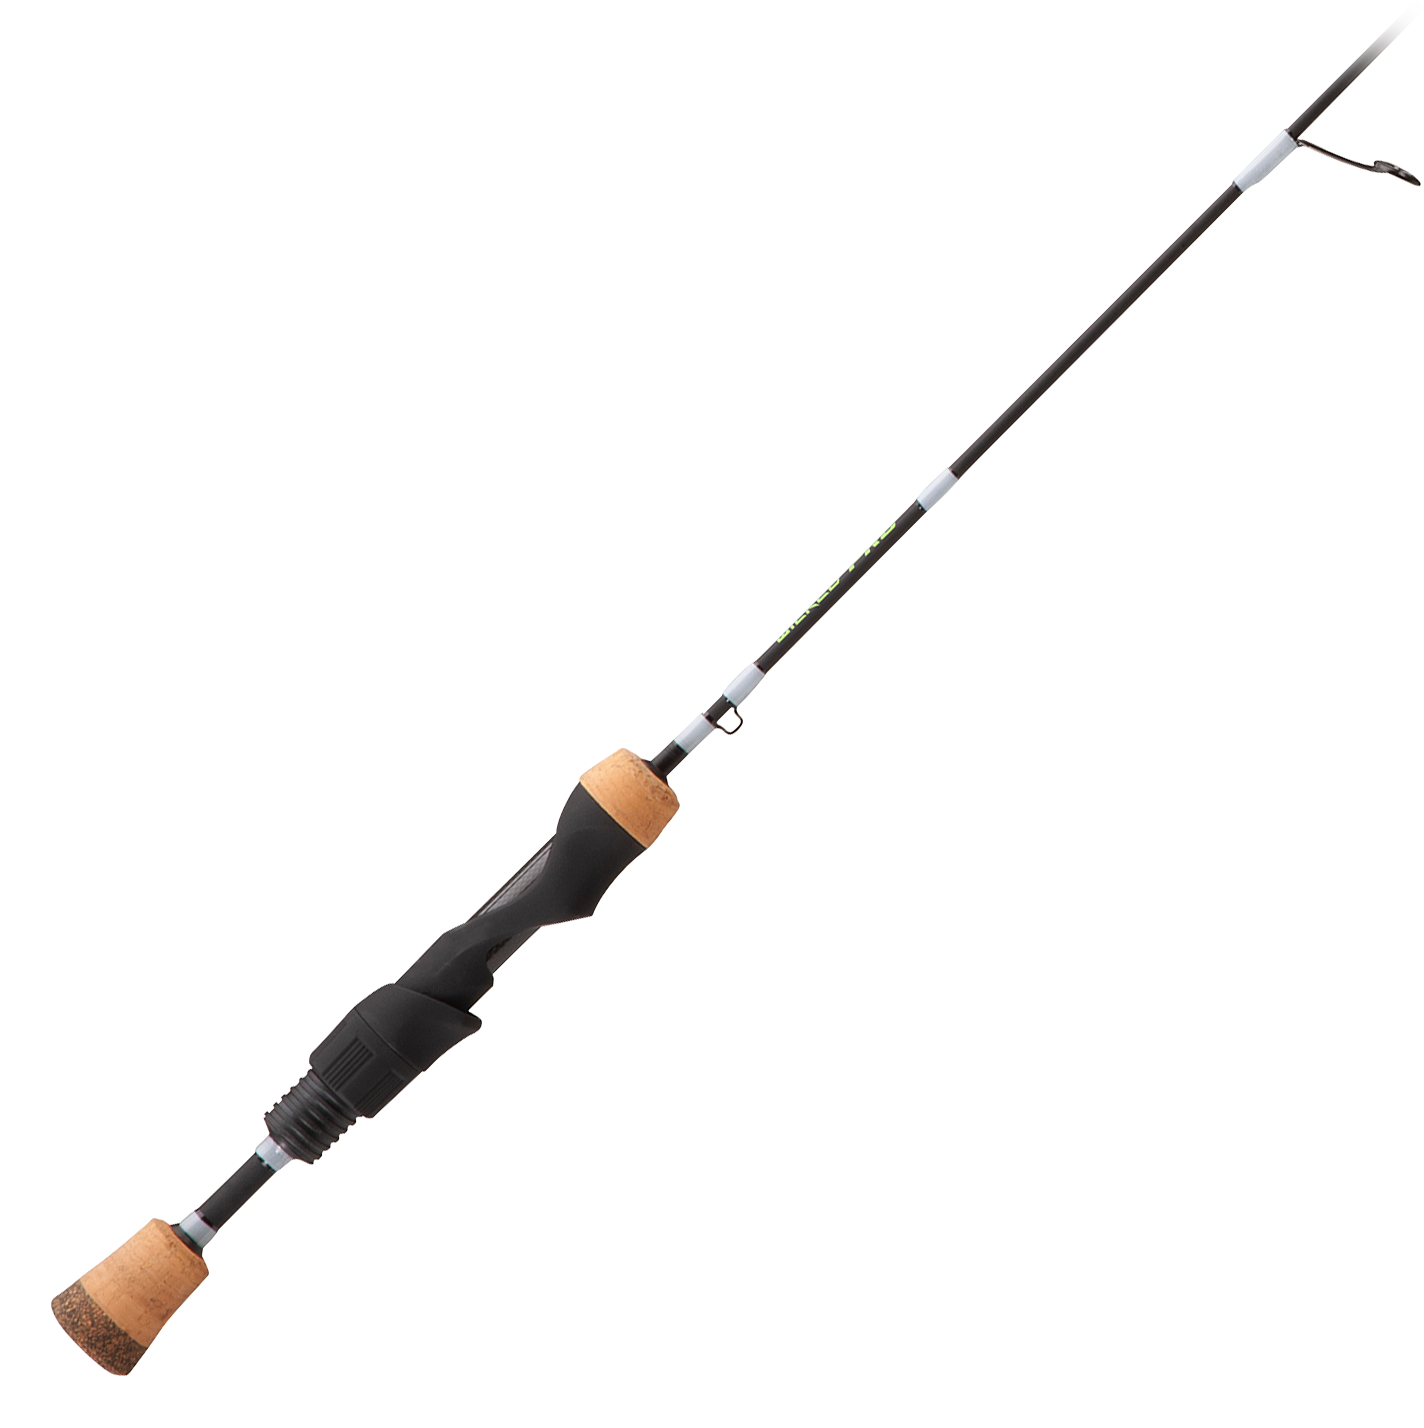  13 FISHING - Wicked Pro Ice Rod - 28 L-Mod (Light Moderate) -  Composite Blank - Full Grip Handle - PS-28L-Mod : Sports & Outdoors